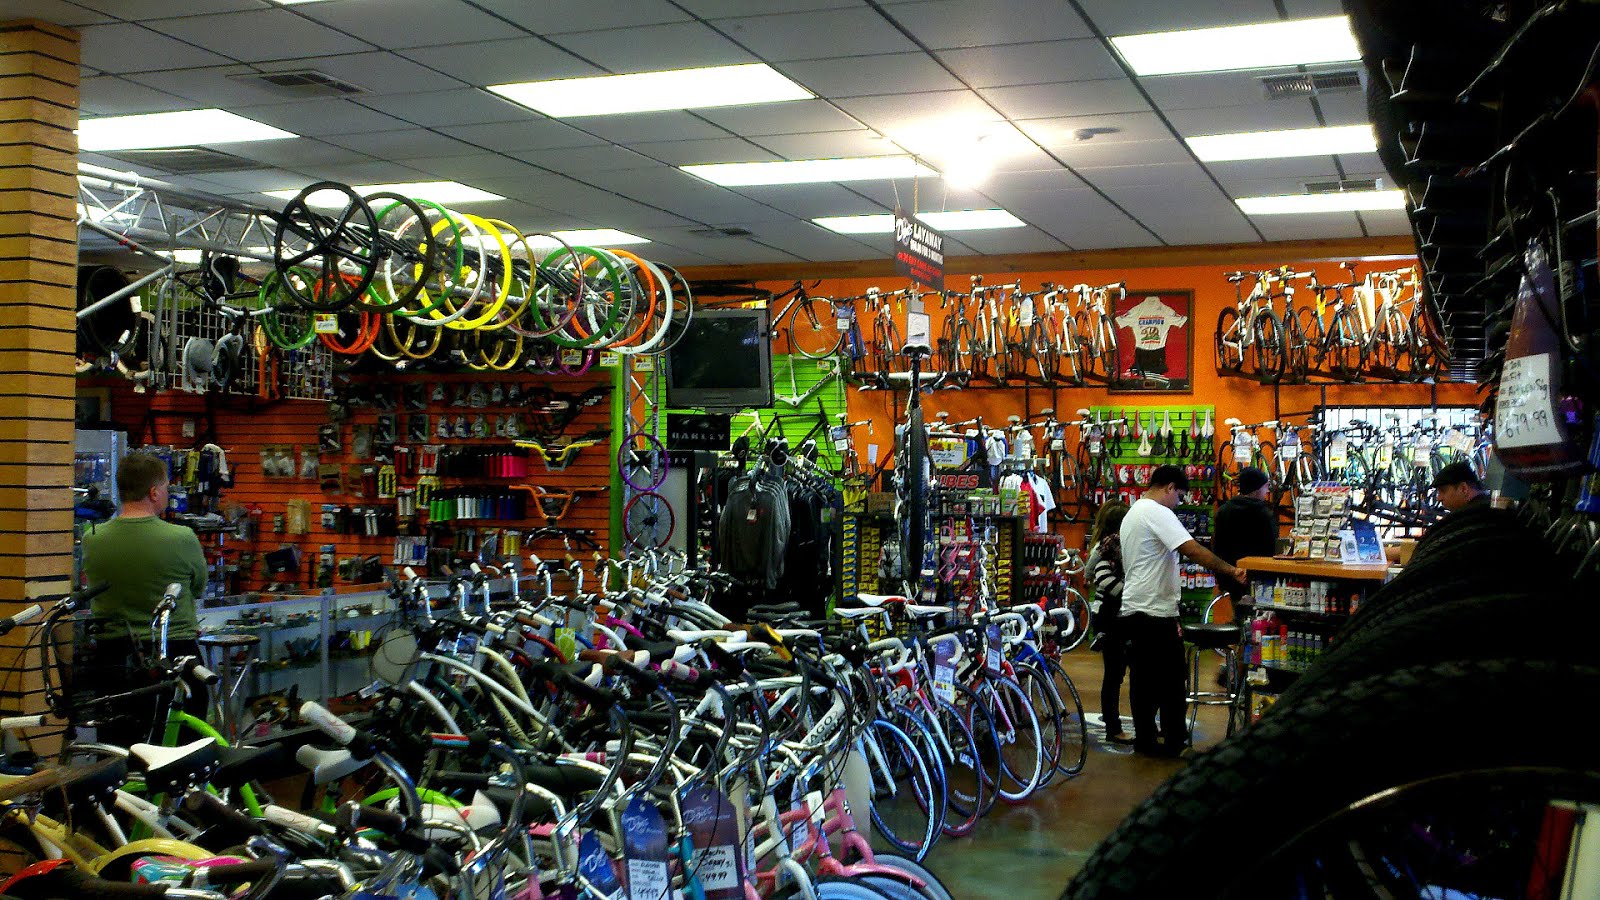 Bike Store Nearby - The%2BCoral%2BWay%2BMiami%2BBike%2BShop%2B%257C%2BBike%2BTech%2BUSA 734375